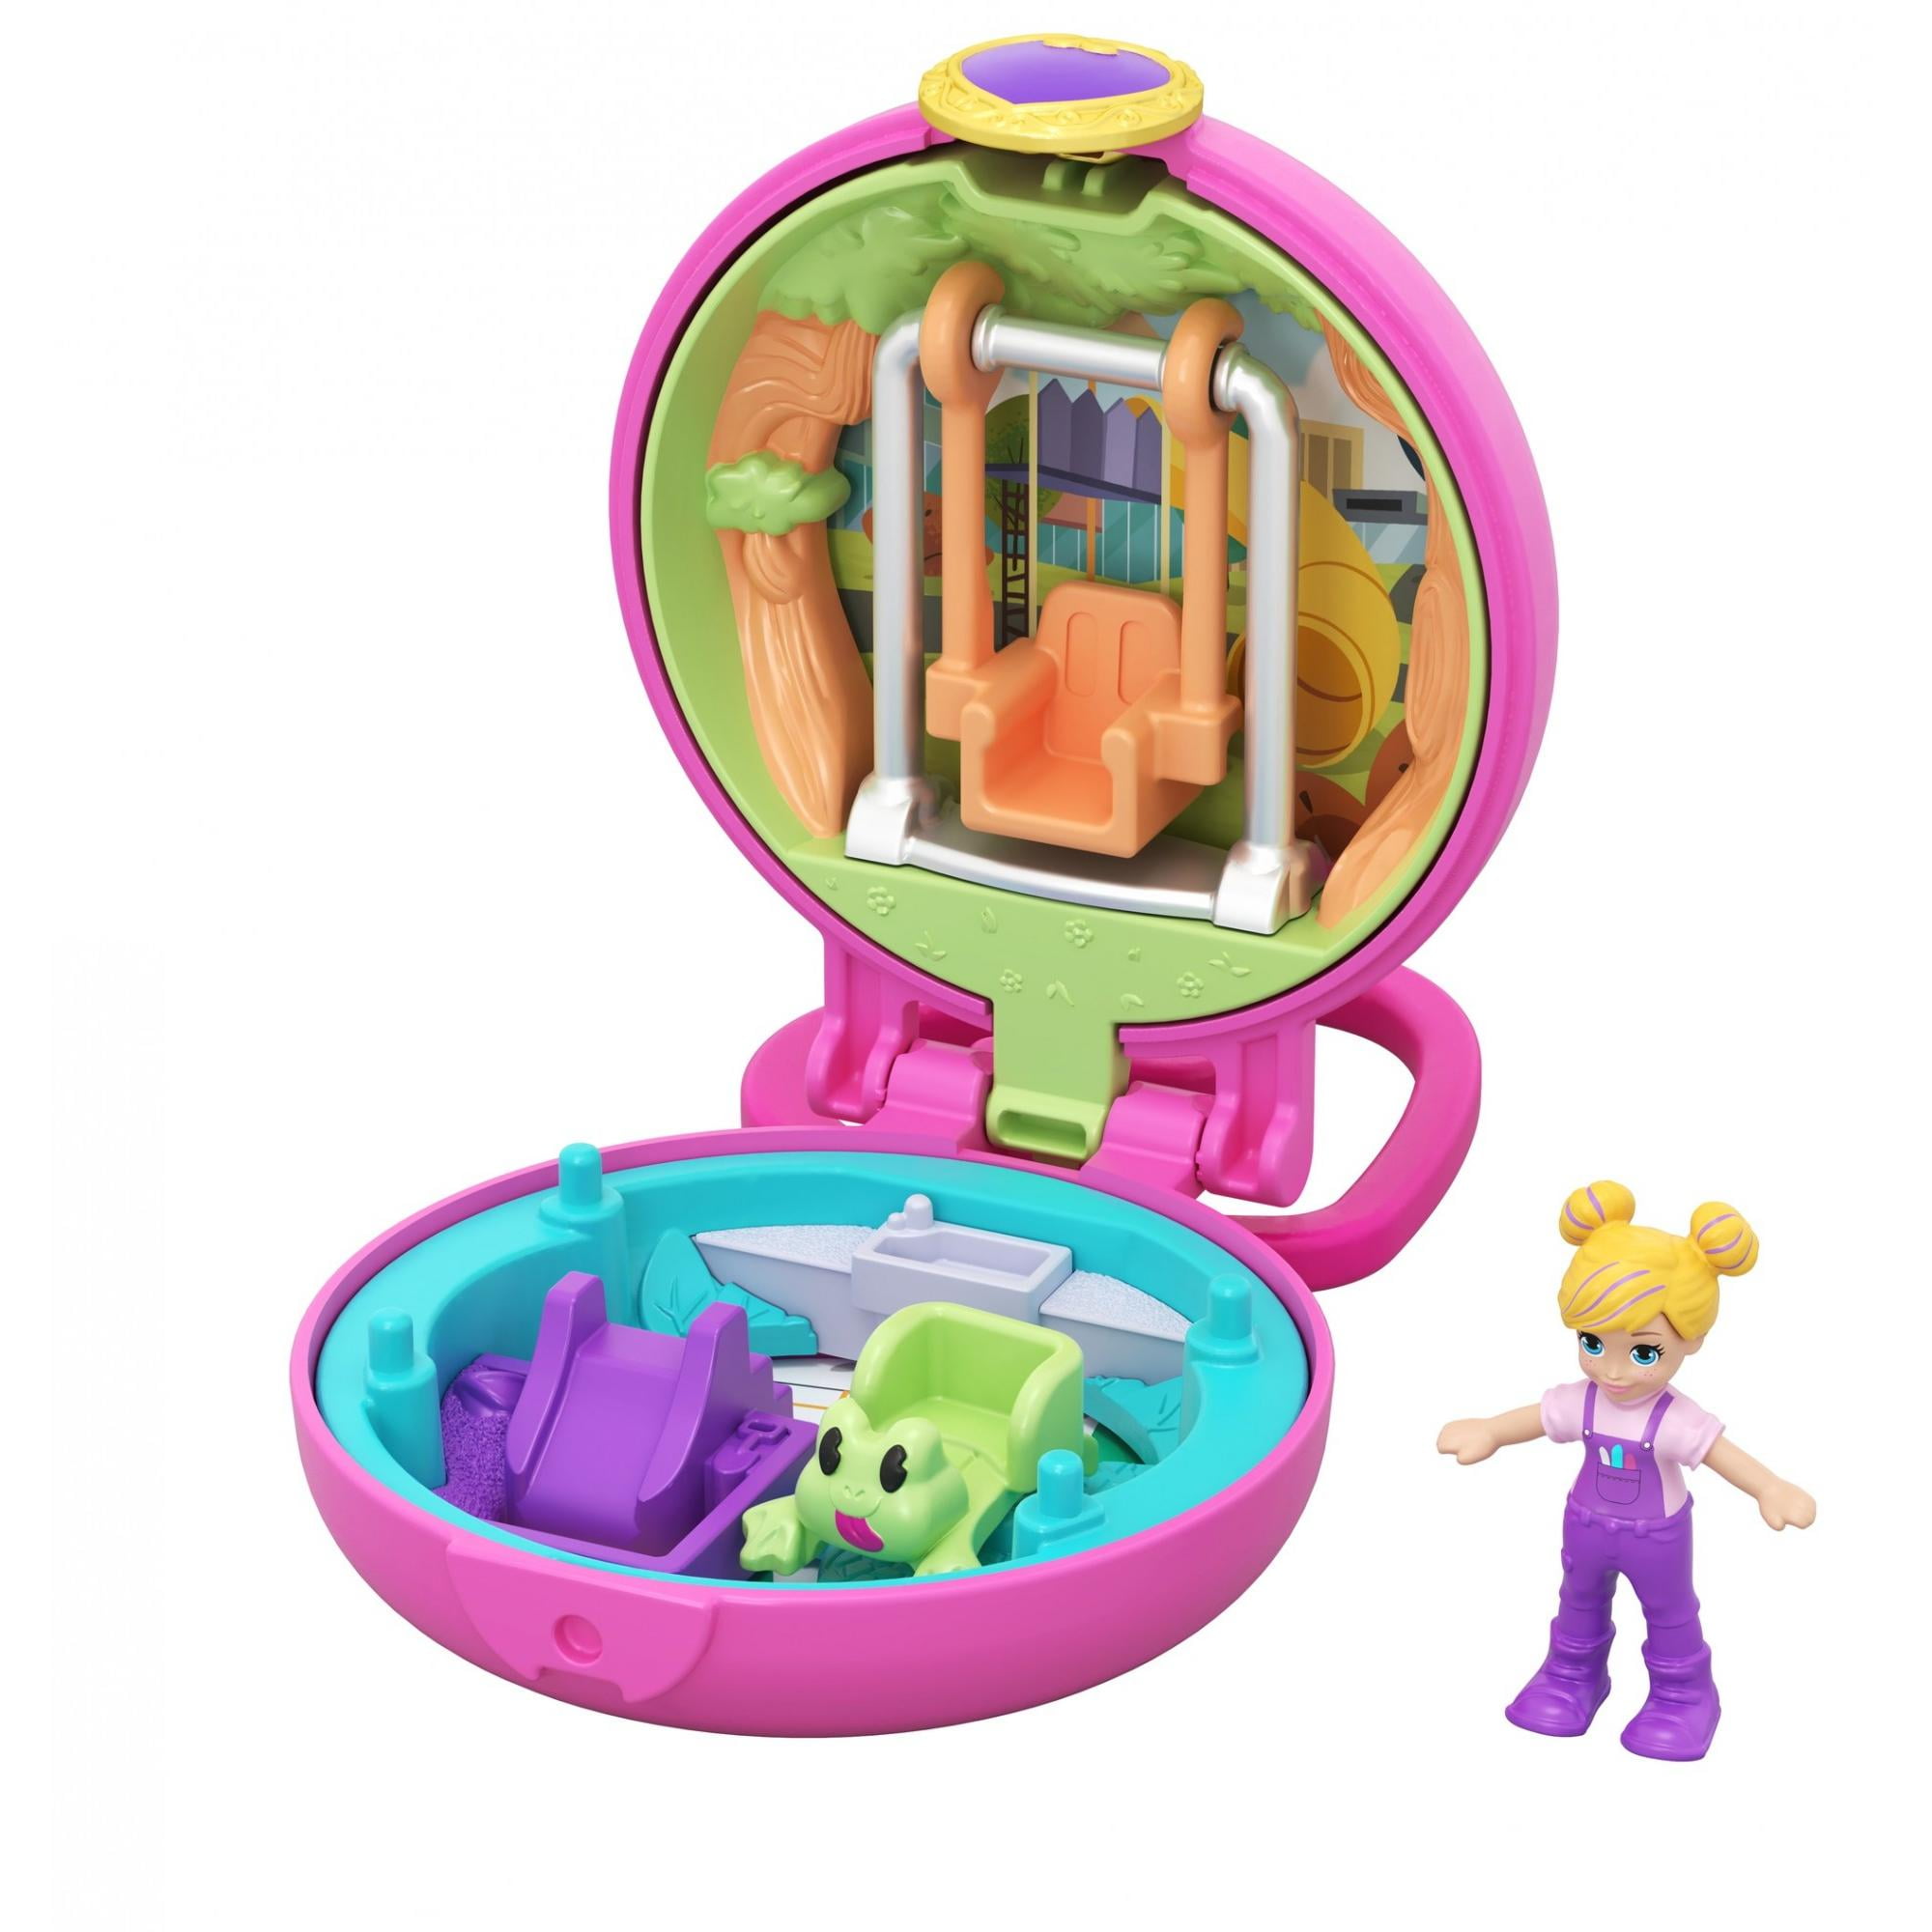 Buy Polly Pocket Tiny Pocket Places Polly Playground Compact at Walmart.com...